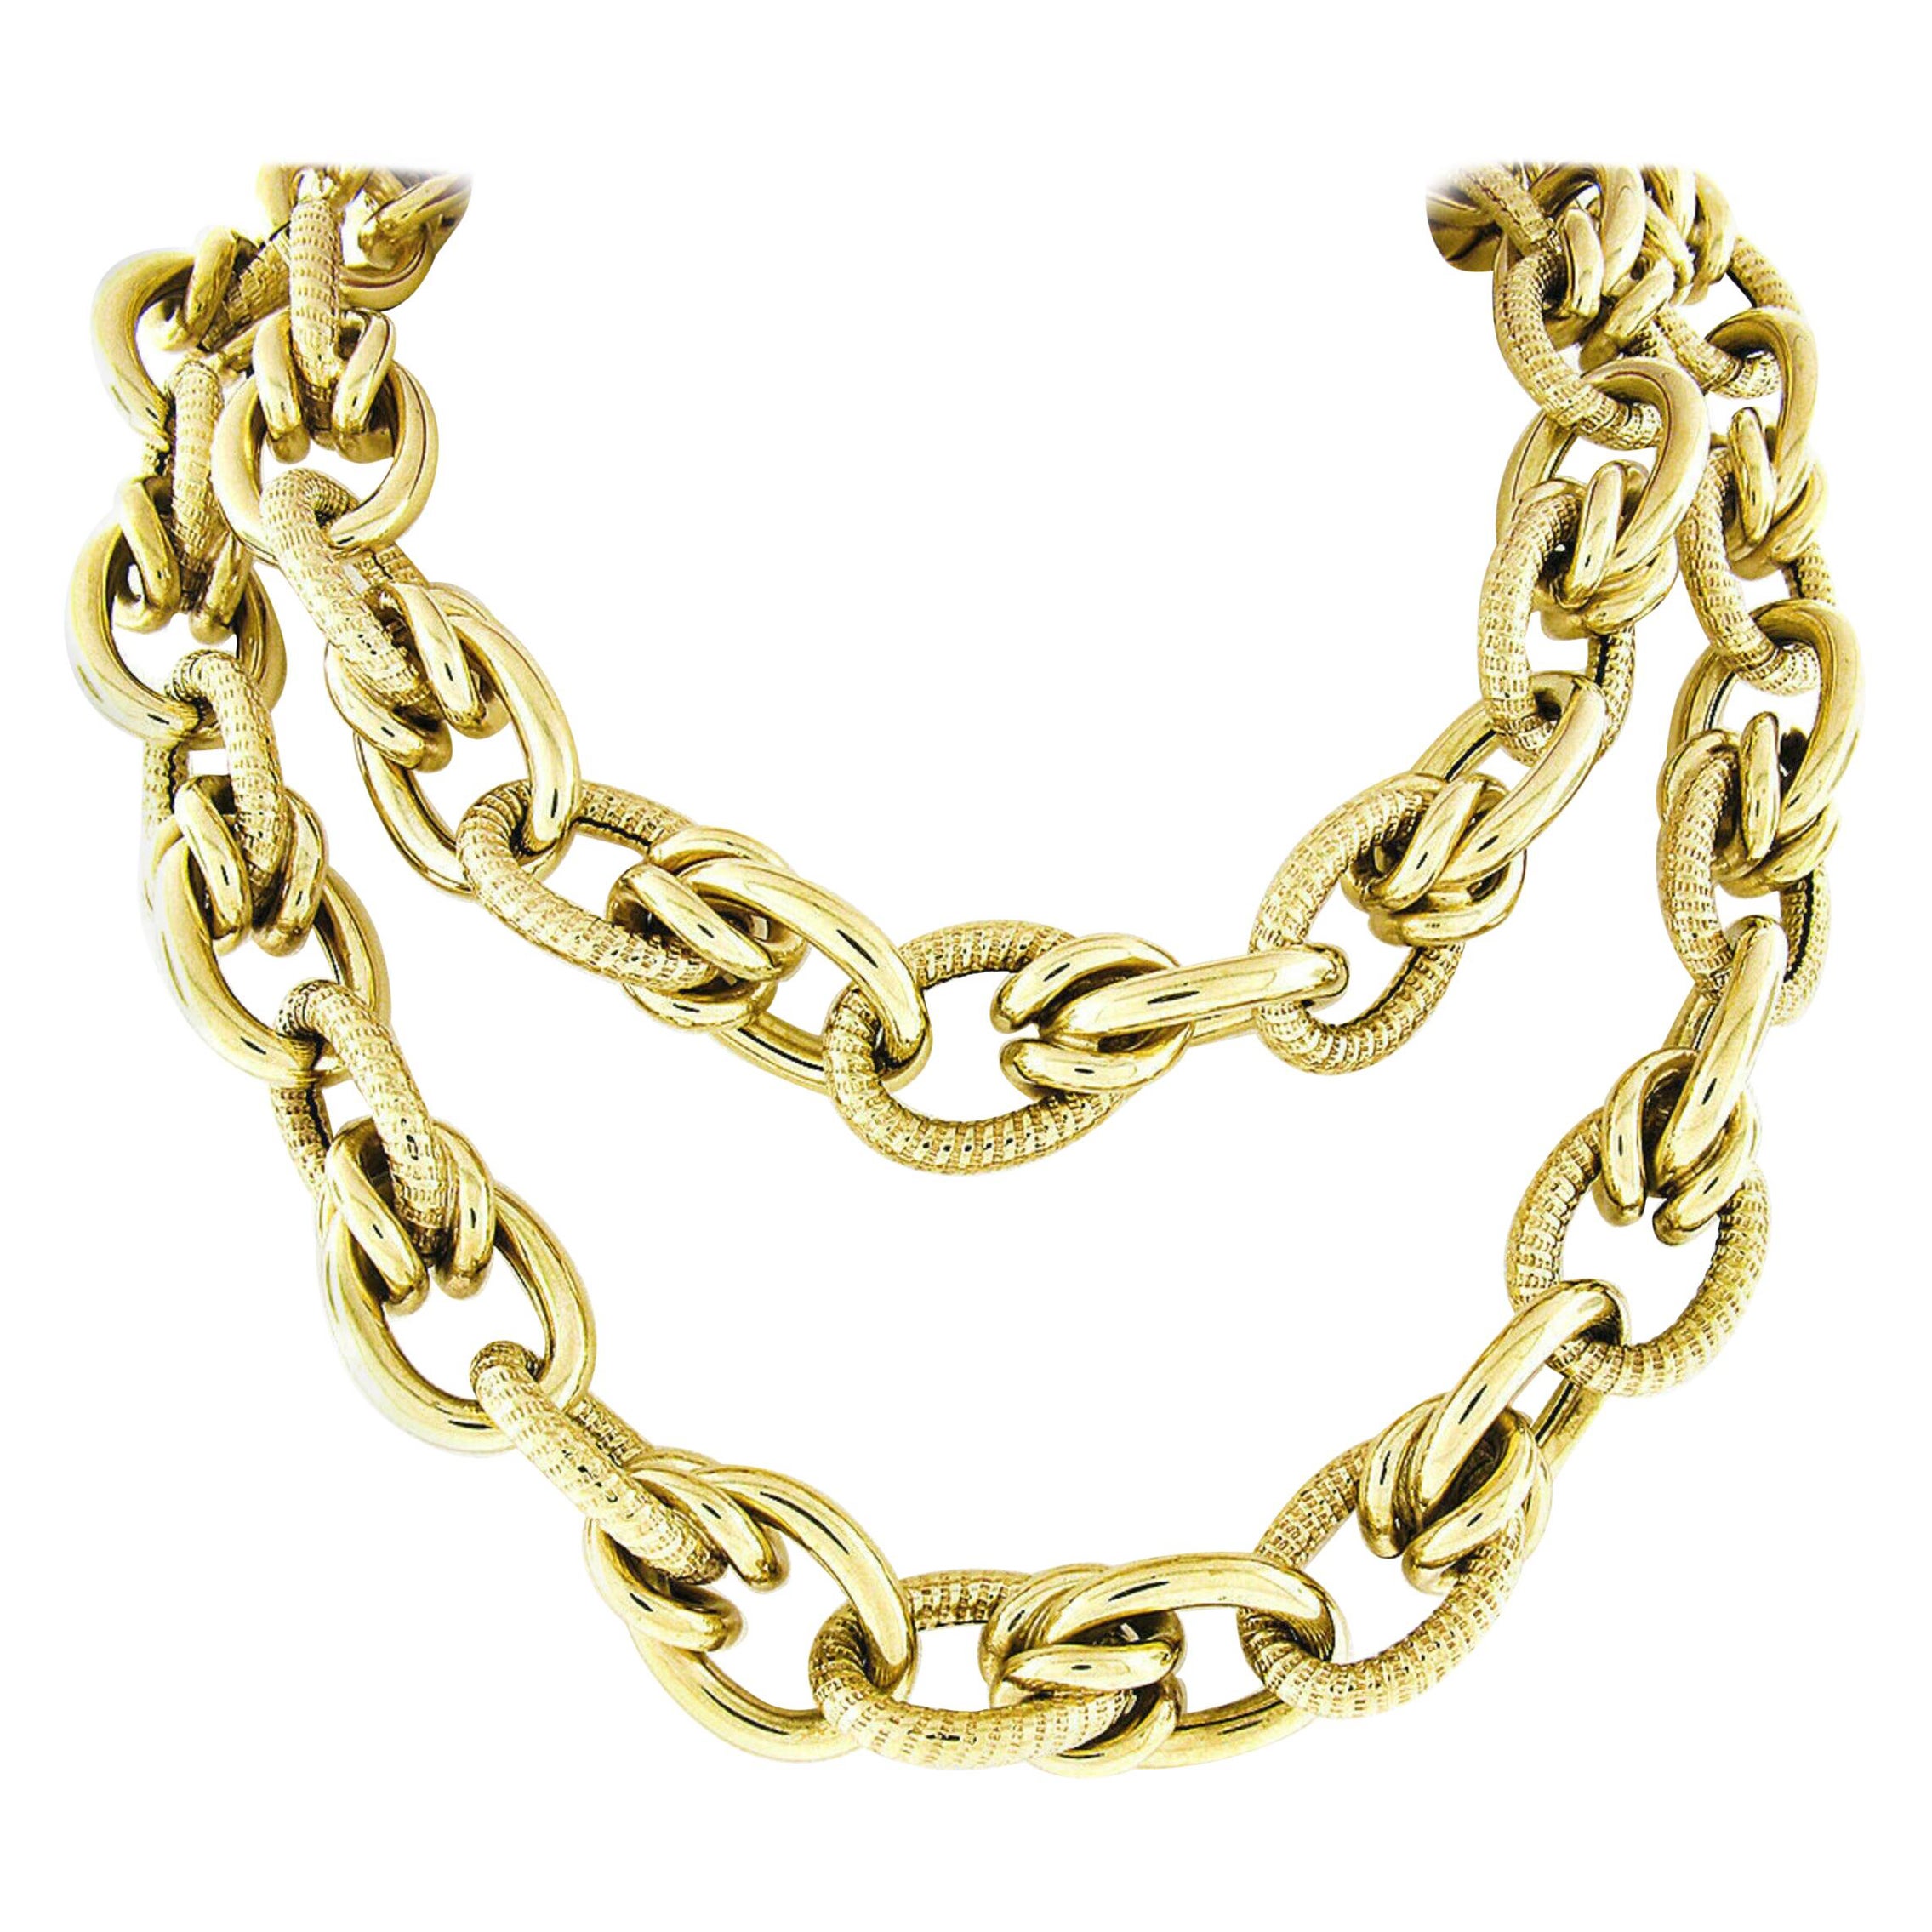 Long 14k Gold Polished Textured Oval Knotted Link Chain Statement Necklace For Sale